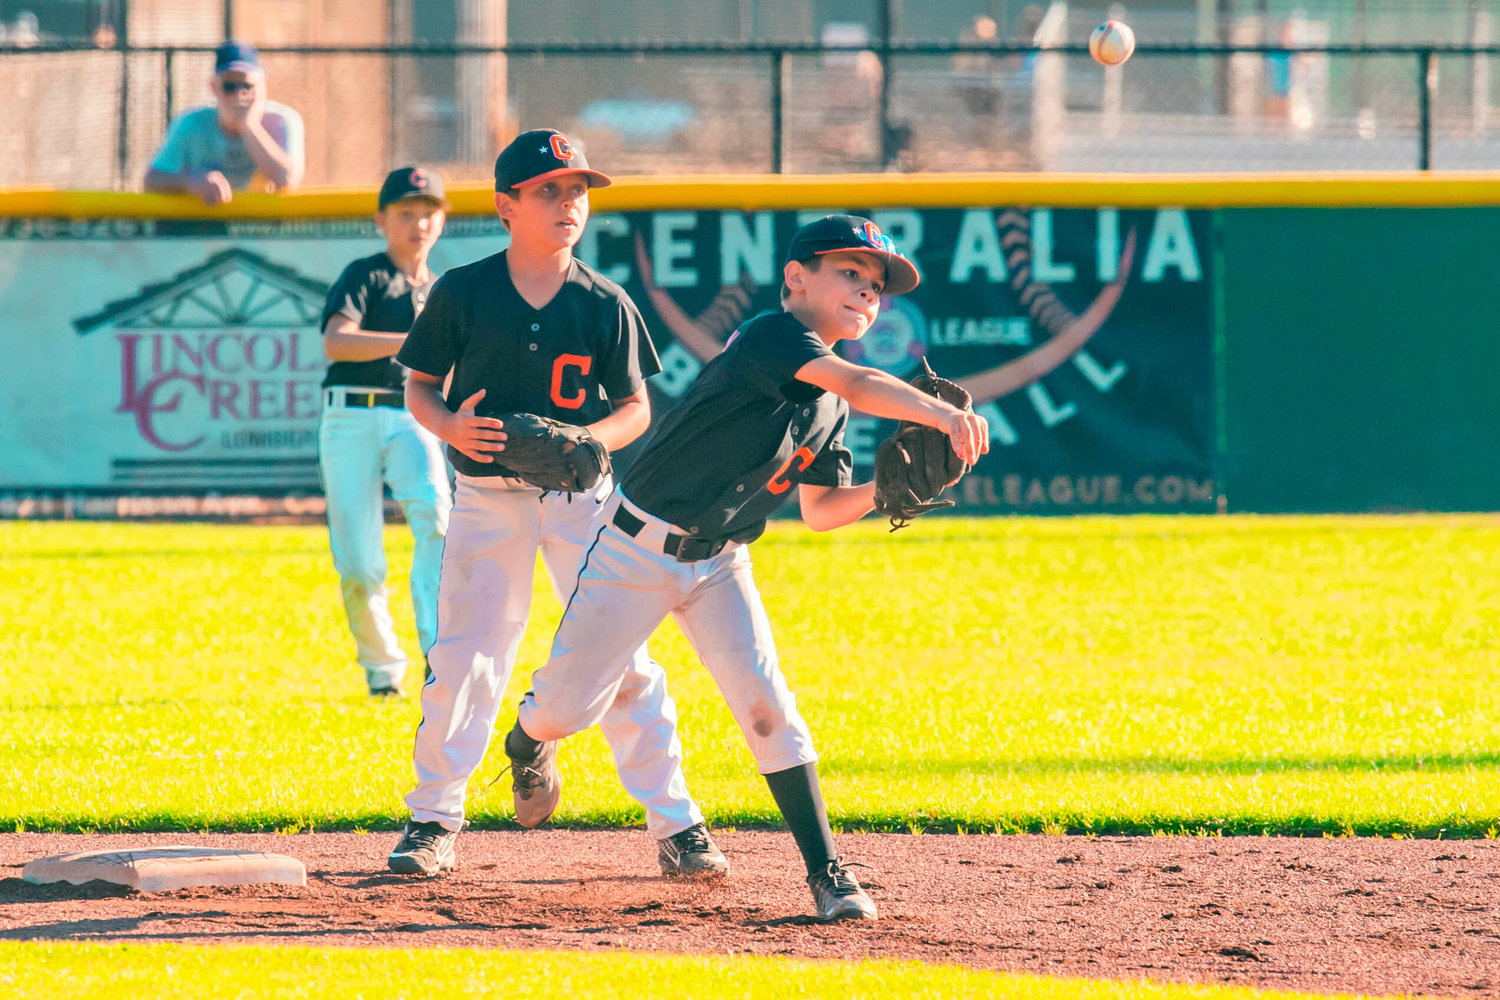 Centralia’s Hank Pennington fields a ball and throws it to first base during the 10U Little League District 3 Championship game against Larch Mountain on Thursday.